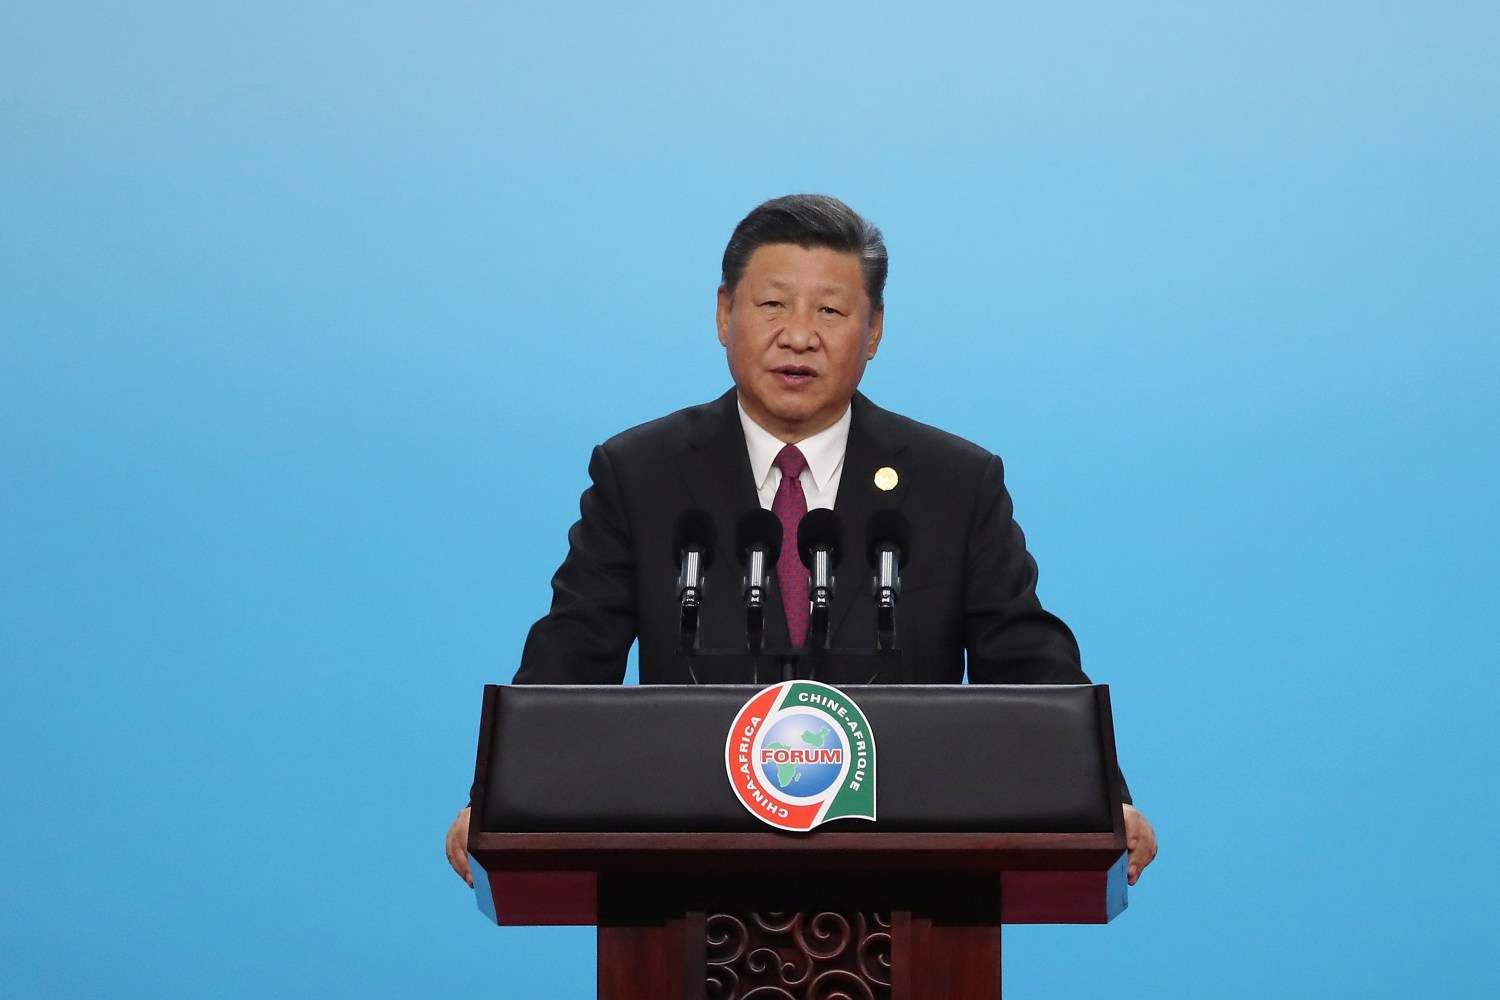 Chinese President Xi Jinping speaks during the High-level Dialogue between Chinese and African Leaders and Business and Industry Representatives at the sixth China-Africa Entrepreneur Conference at the Beijing National Convention Center in Beijing, China September 3, 2018. Lintao Zhang/Pool via REUTERS - RC1C7518E350